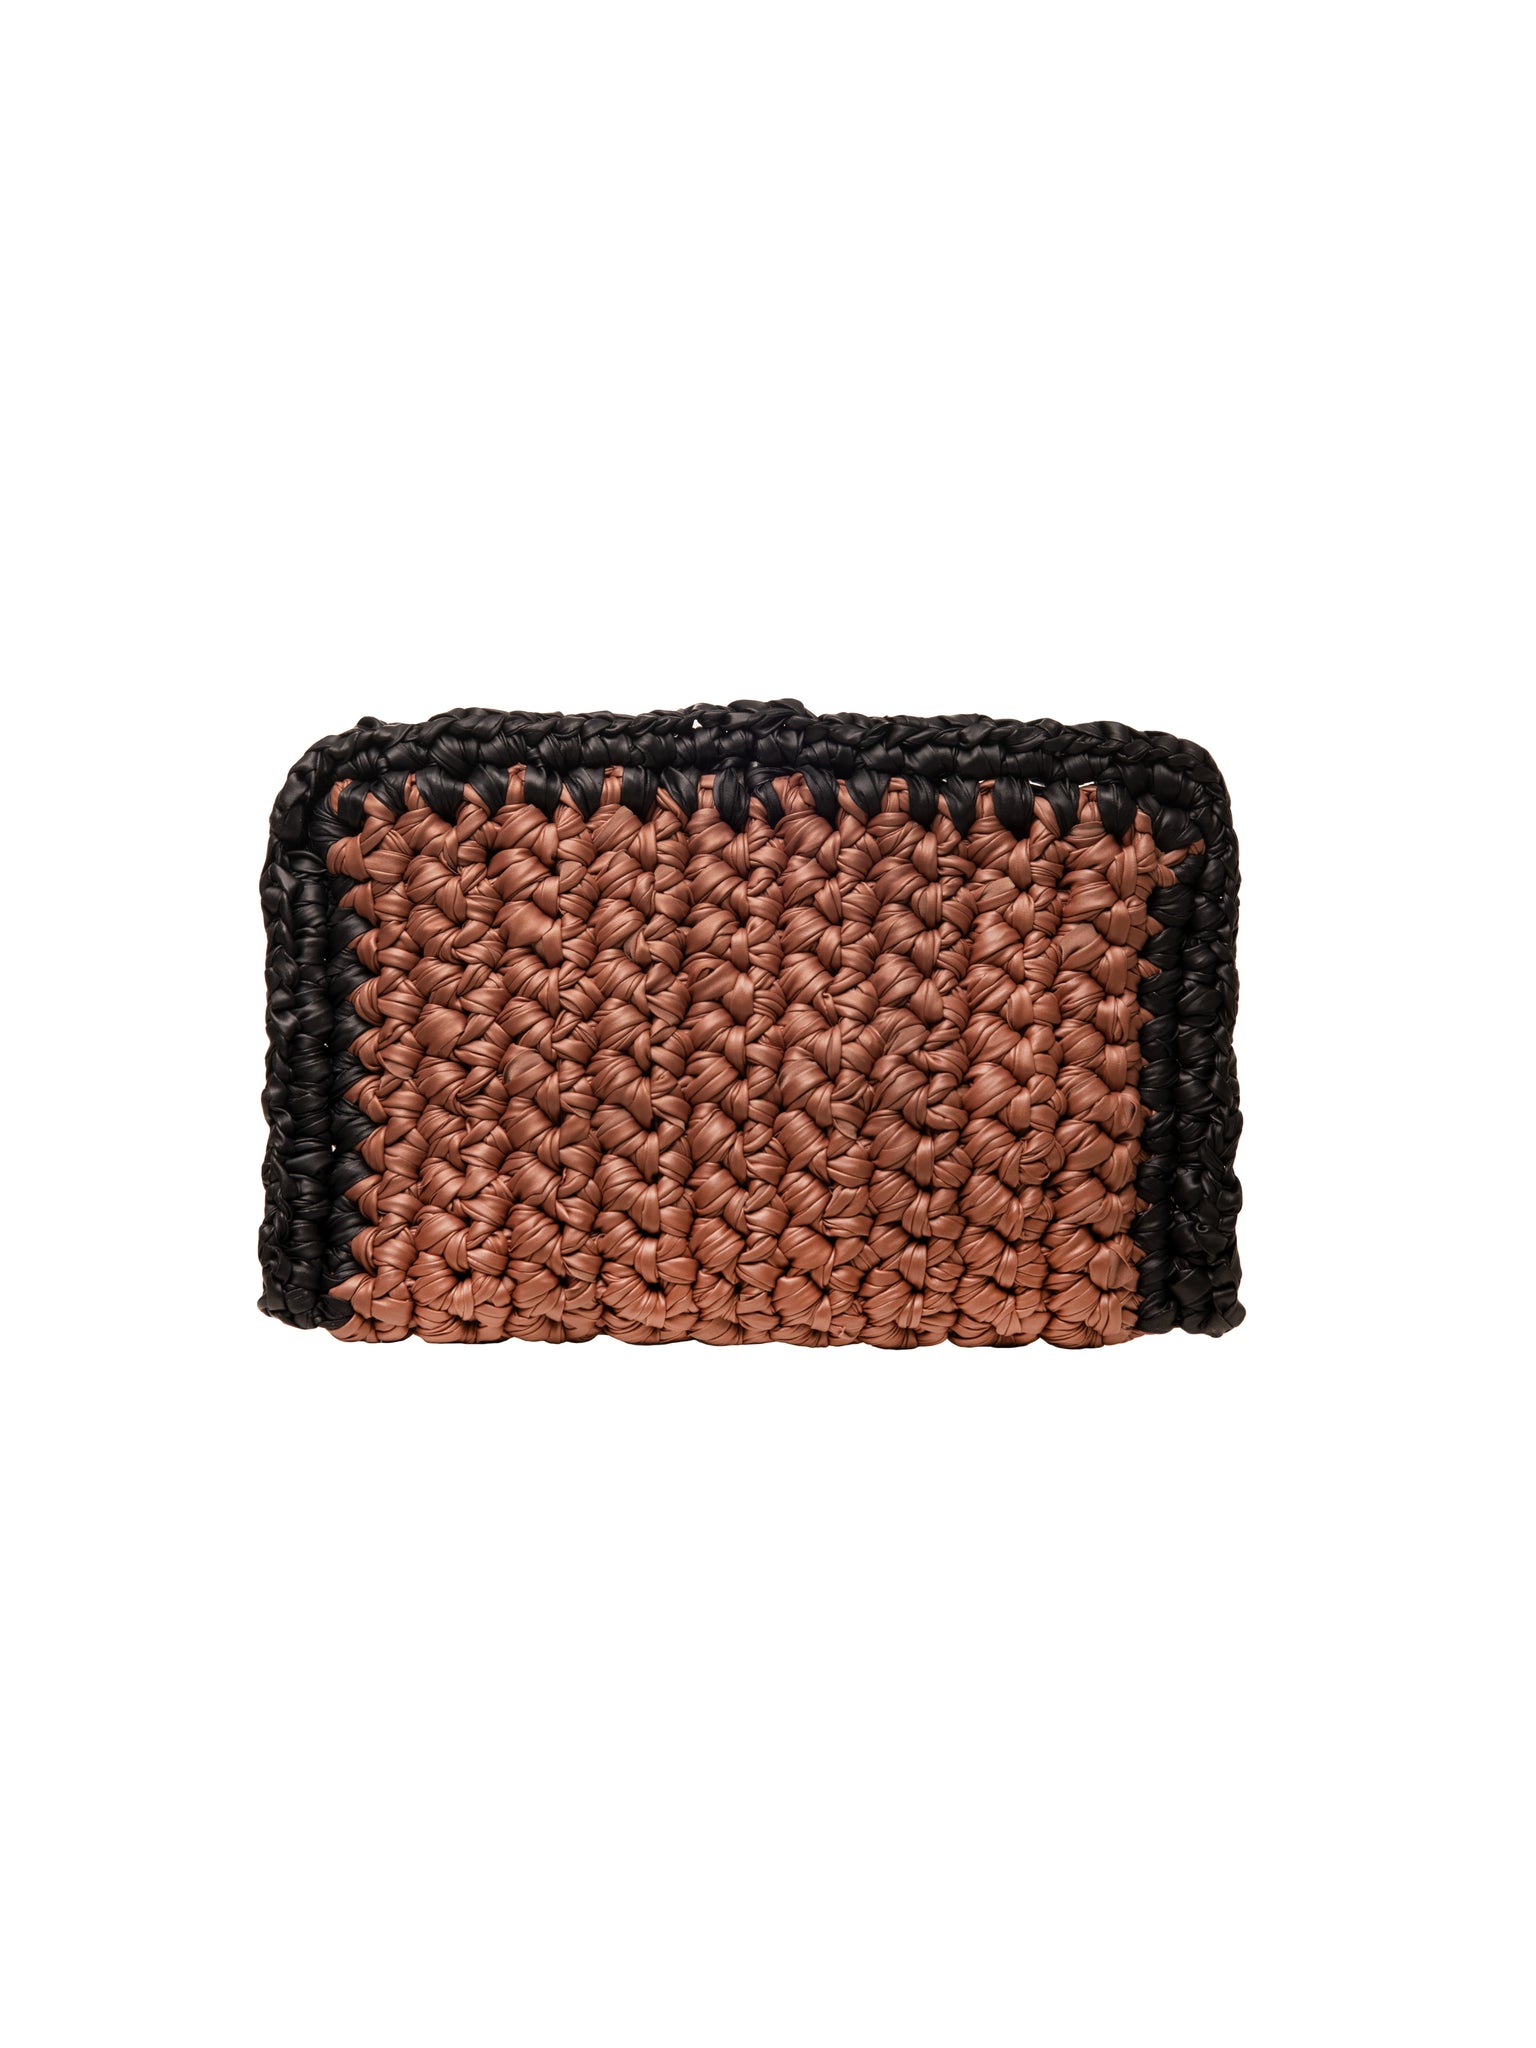 Brown and Black Ruffle Clutch